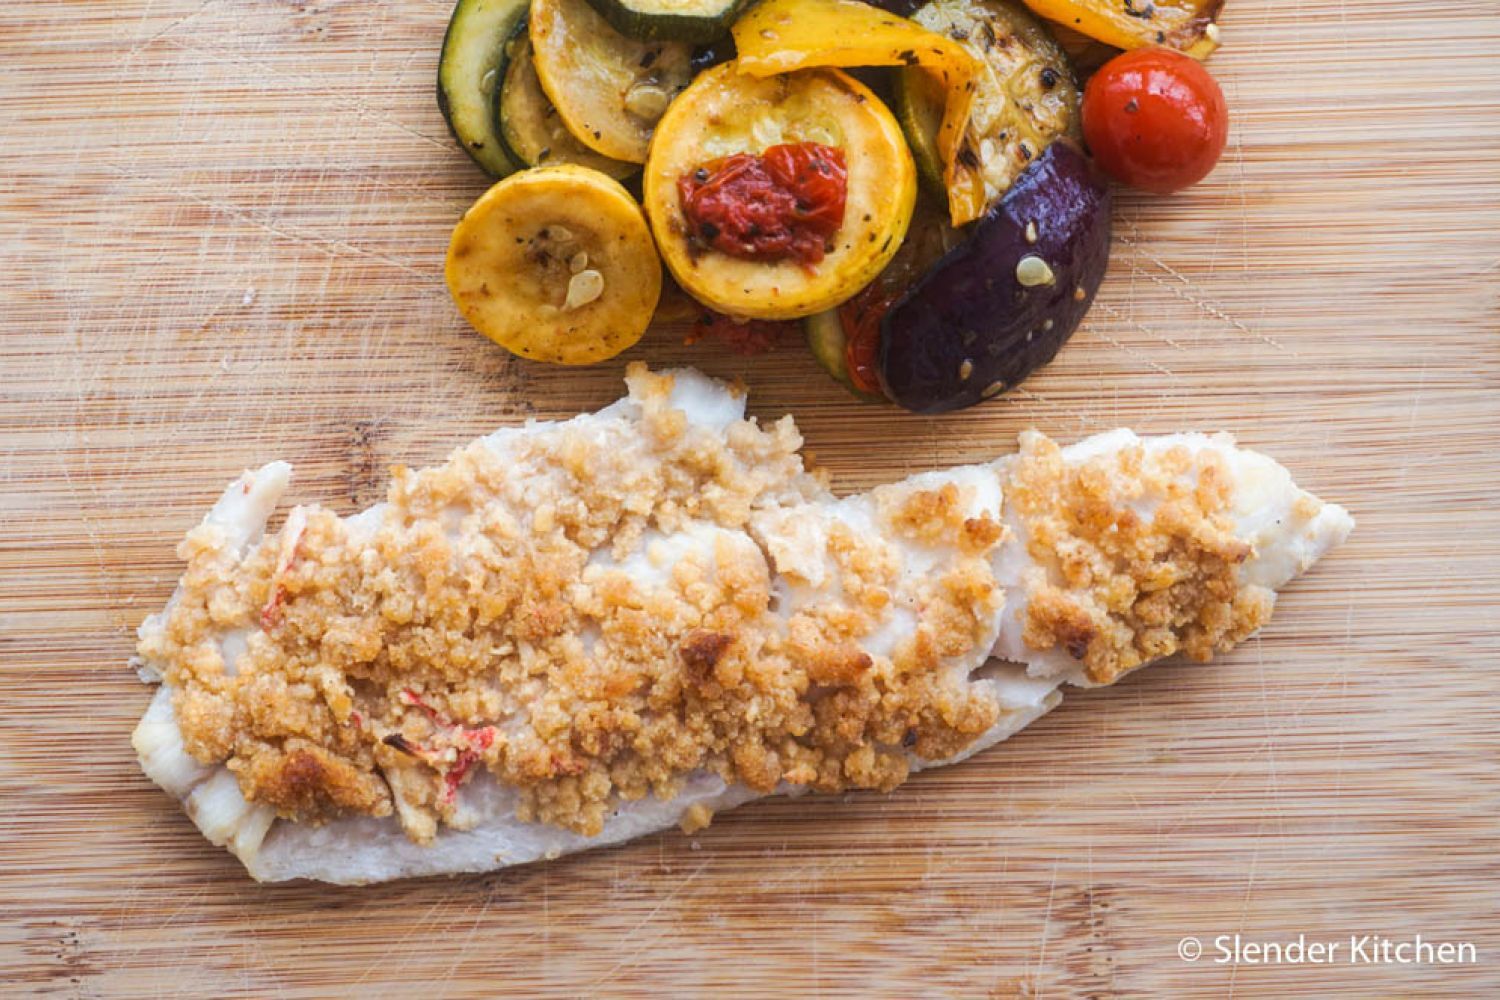 Baked haddock with seafood stuffing and vegetables on a cutting board.